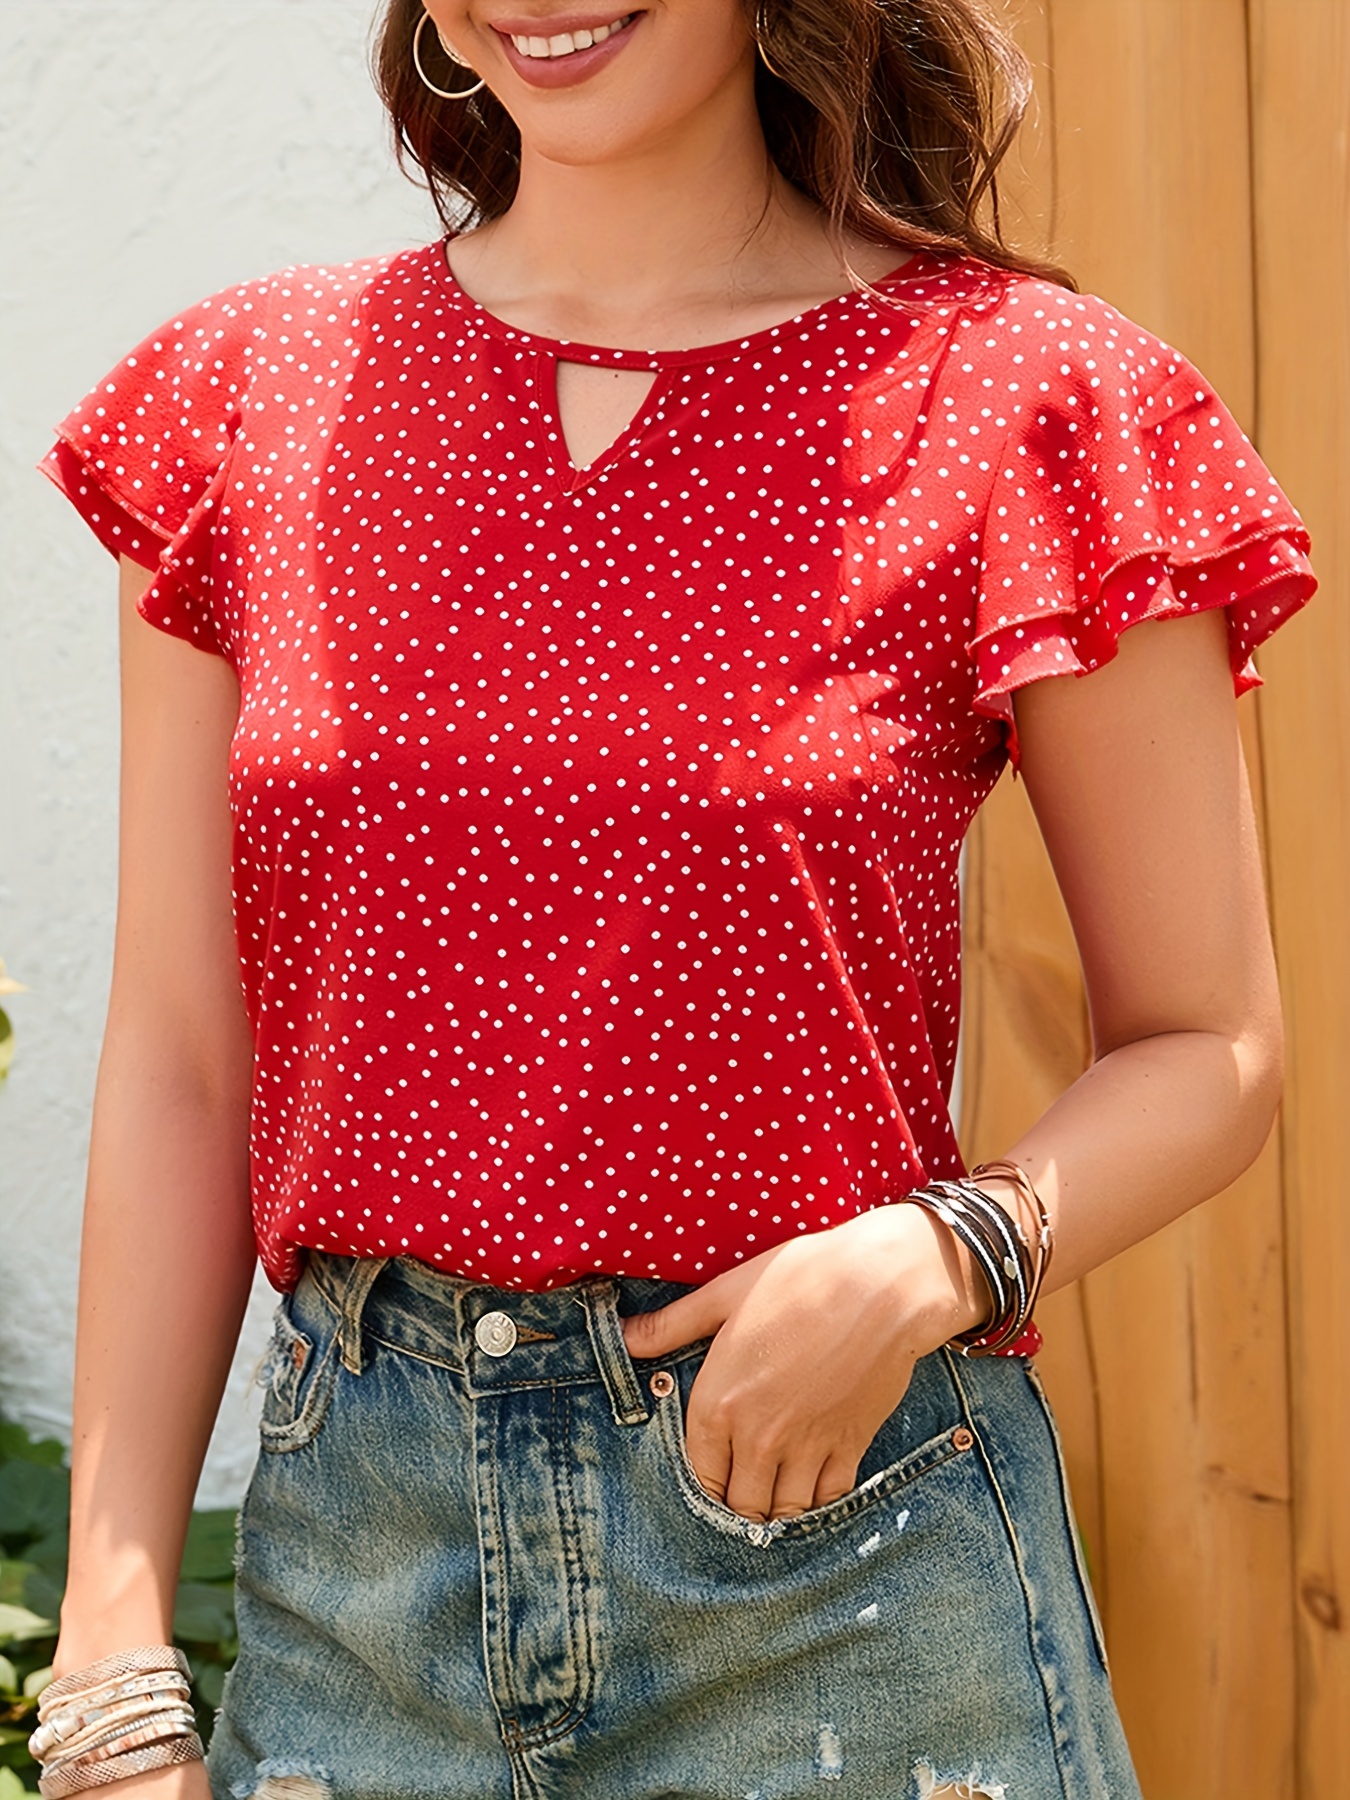 Red women's shirt with white polka dots, Shirts